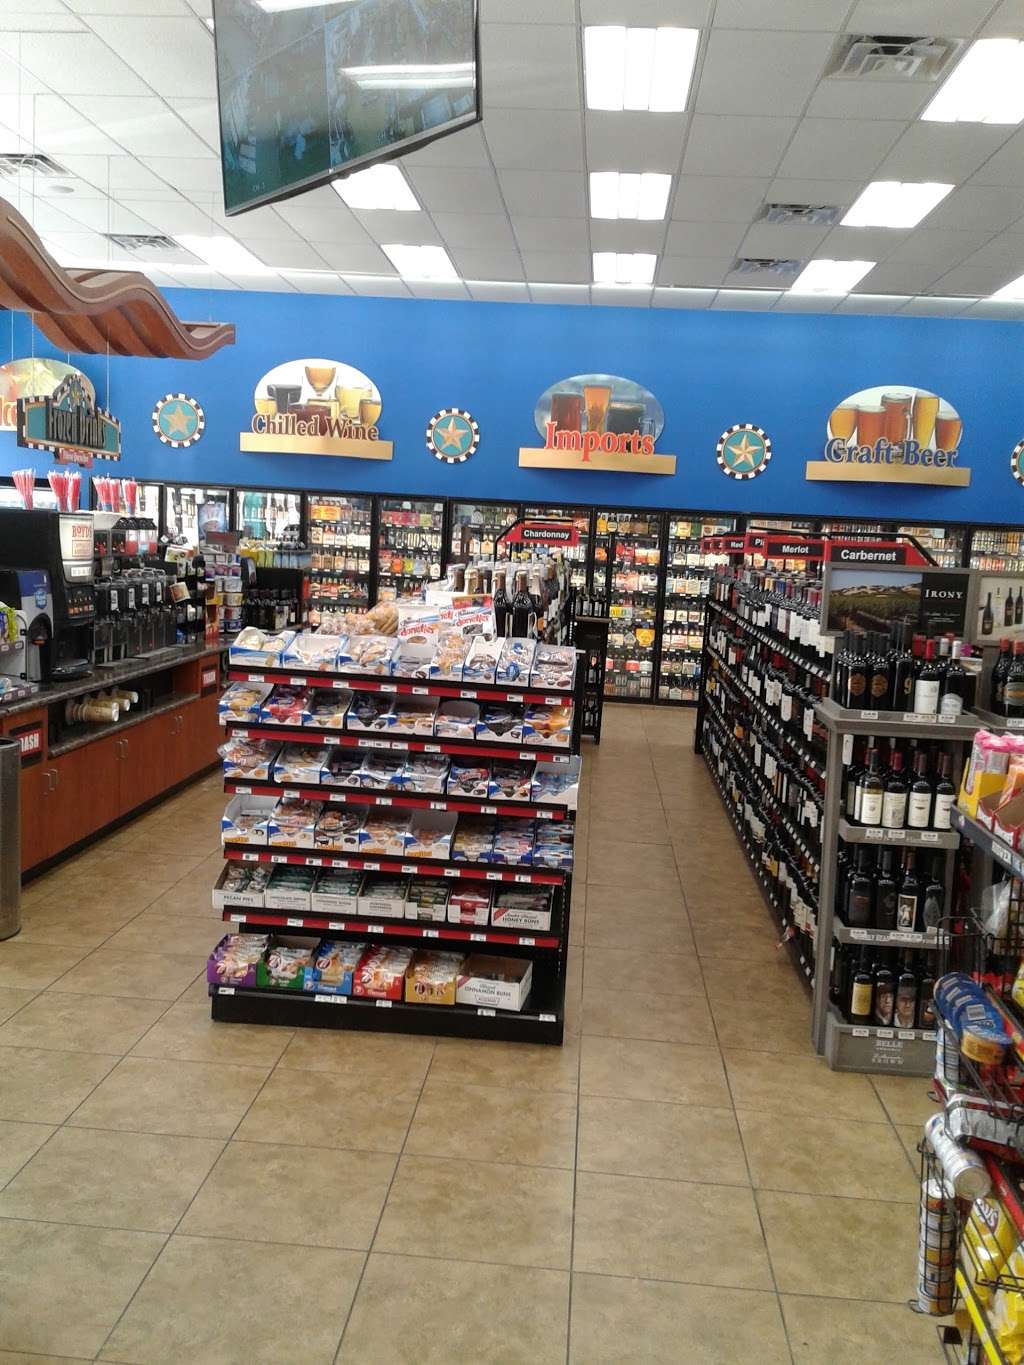 Express Mart 4 | 18618 Champion Forest Dr, Spring, TX 77379, USA | Phone: (346) 808-3360